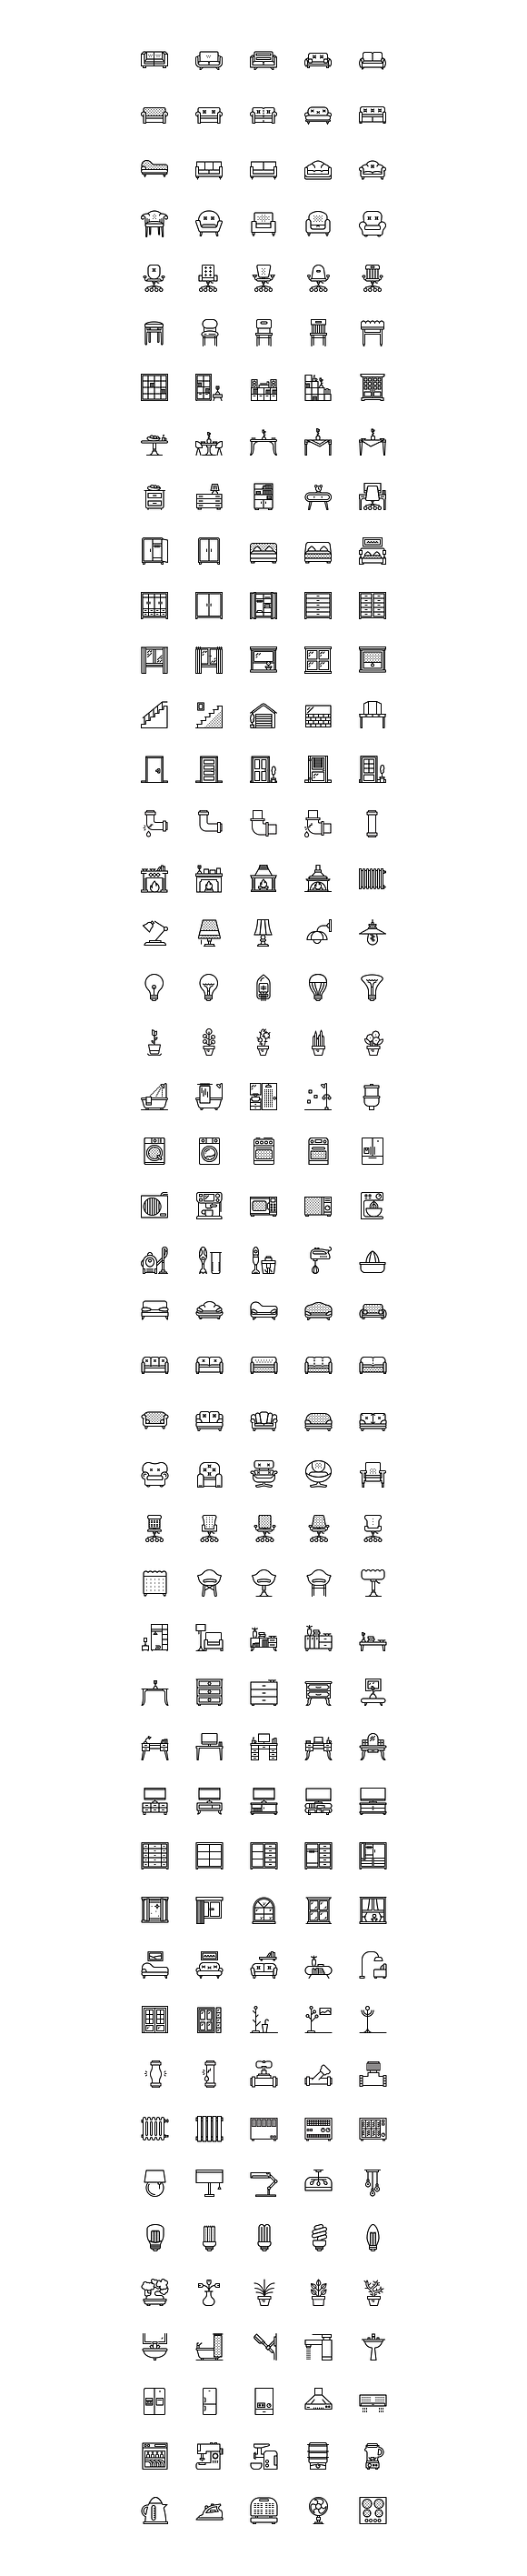 SMASHICONS - 920+ Households Icons - in Illustrations - product preview 1